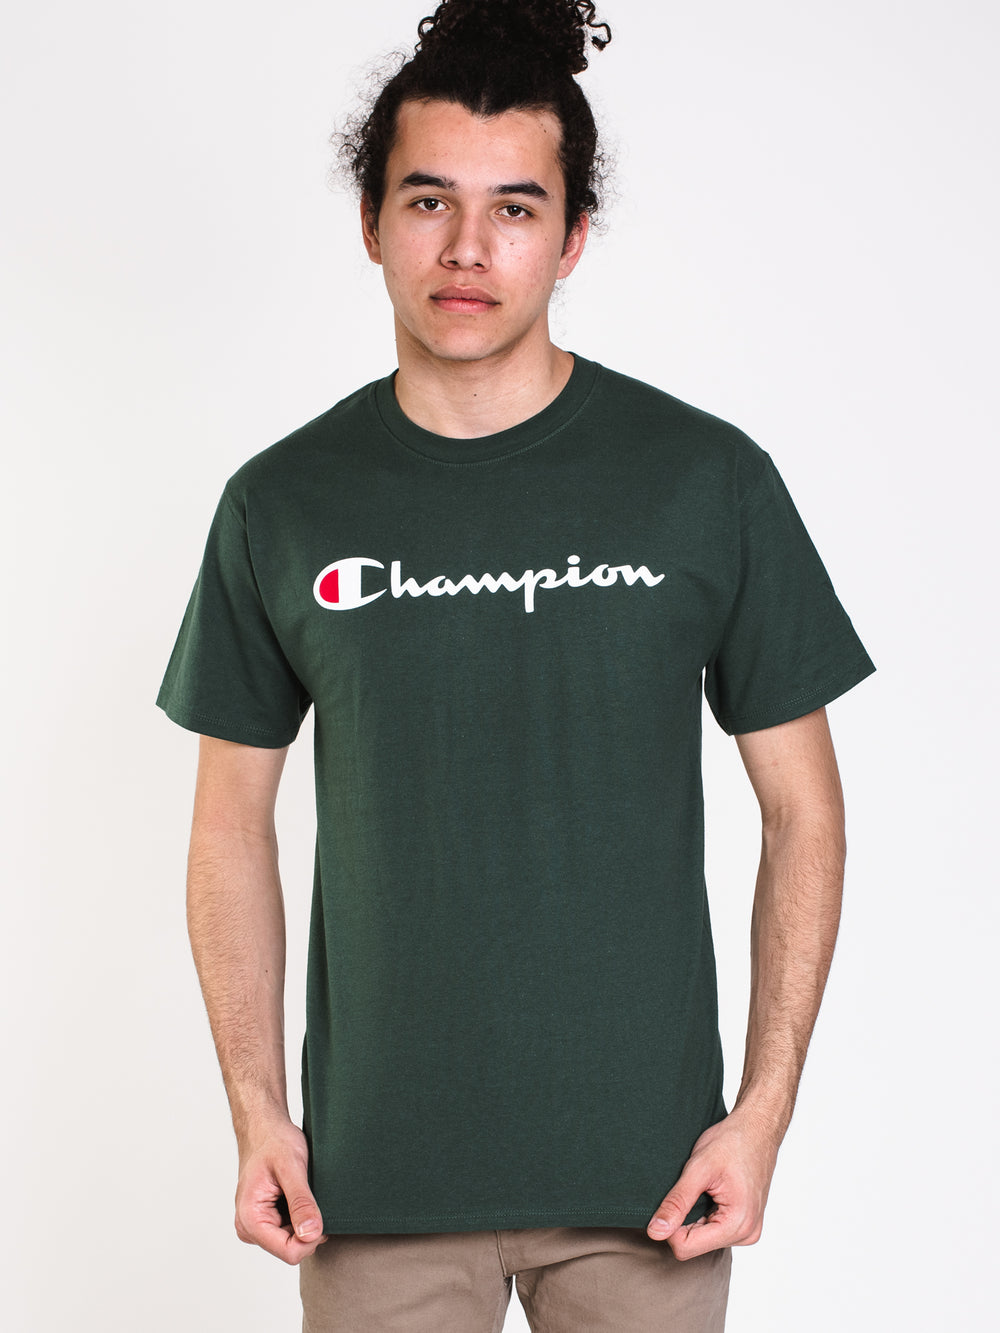 CHAMPION GRAPHIC T-SHIRT  - CLEARANCE